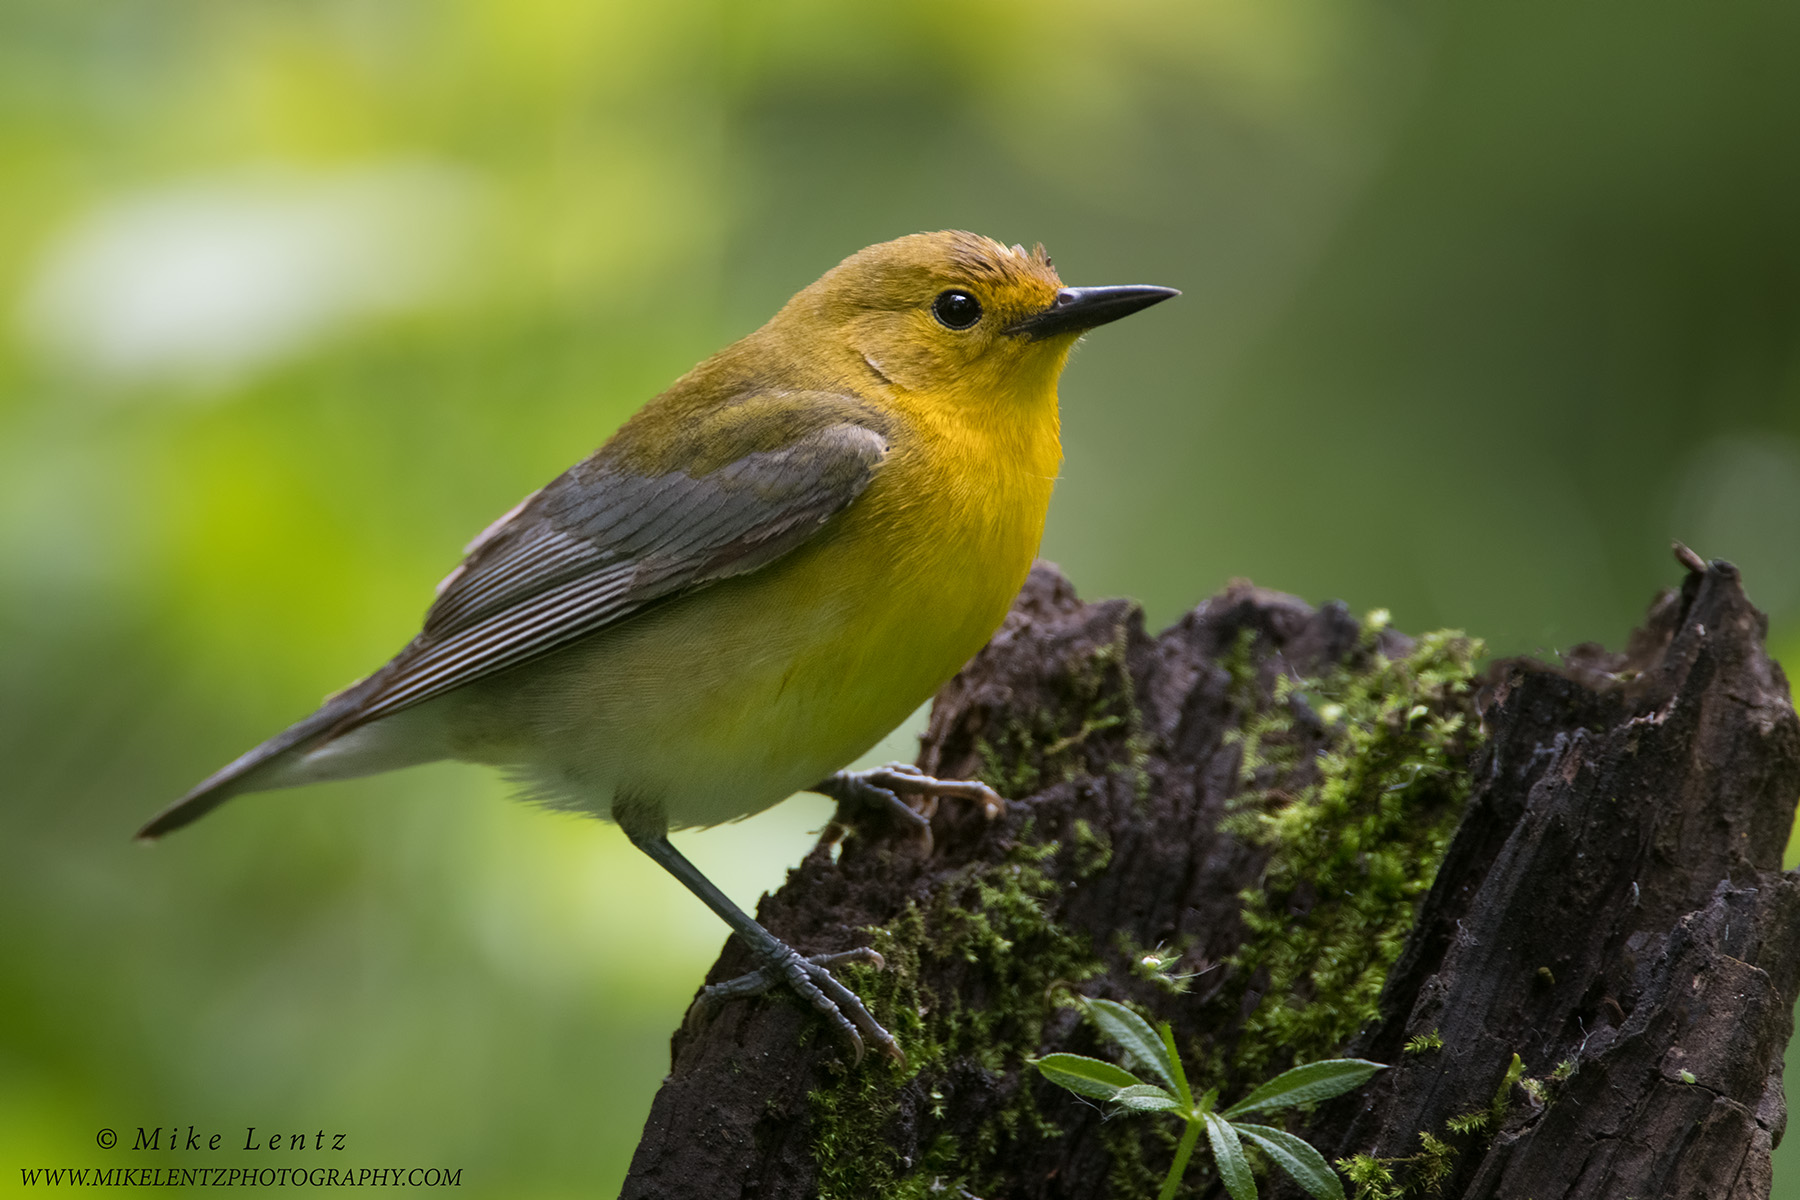 Prothonotary warbler (female) on log